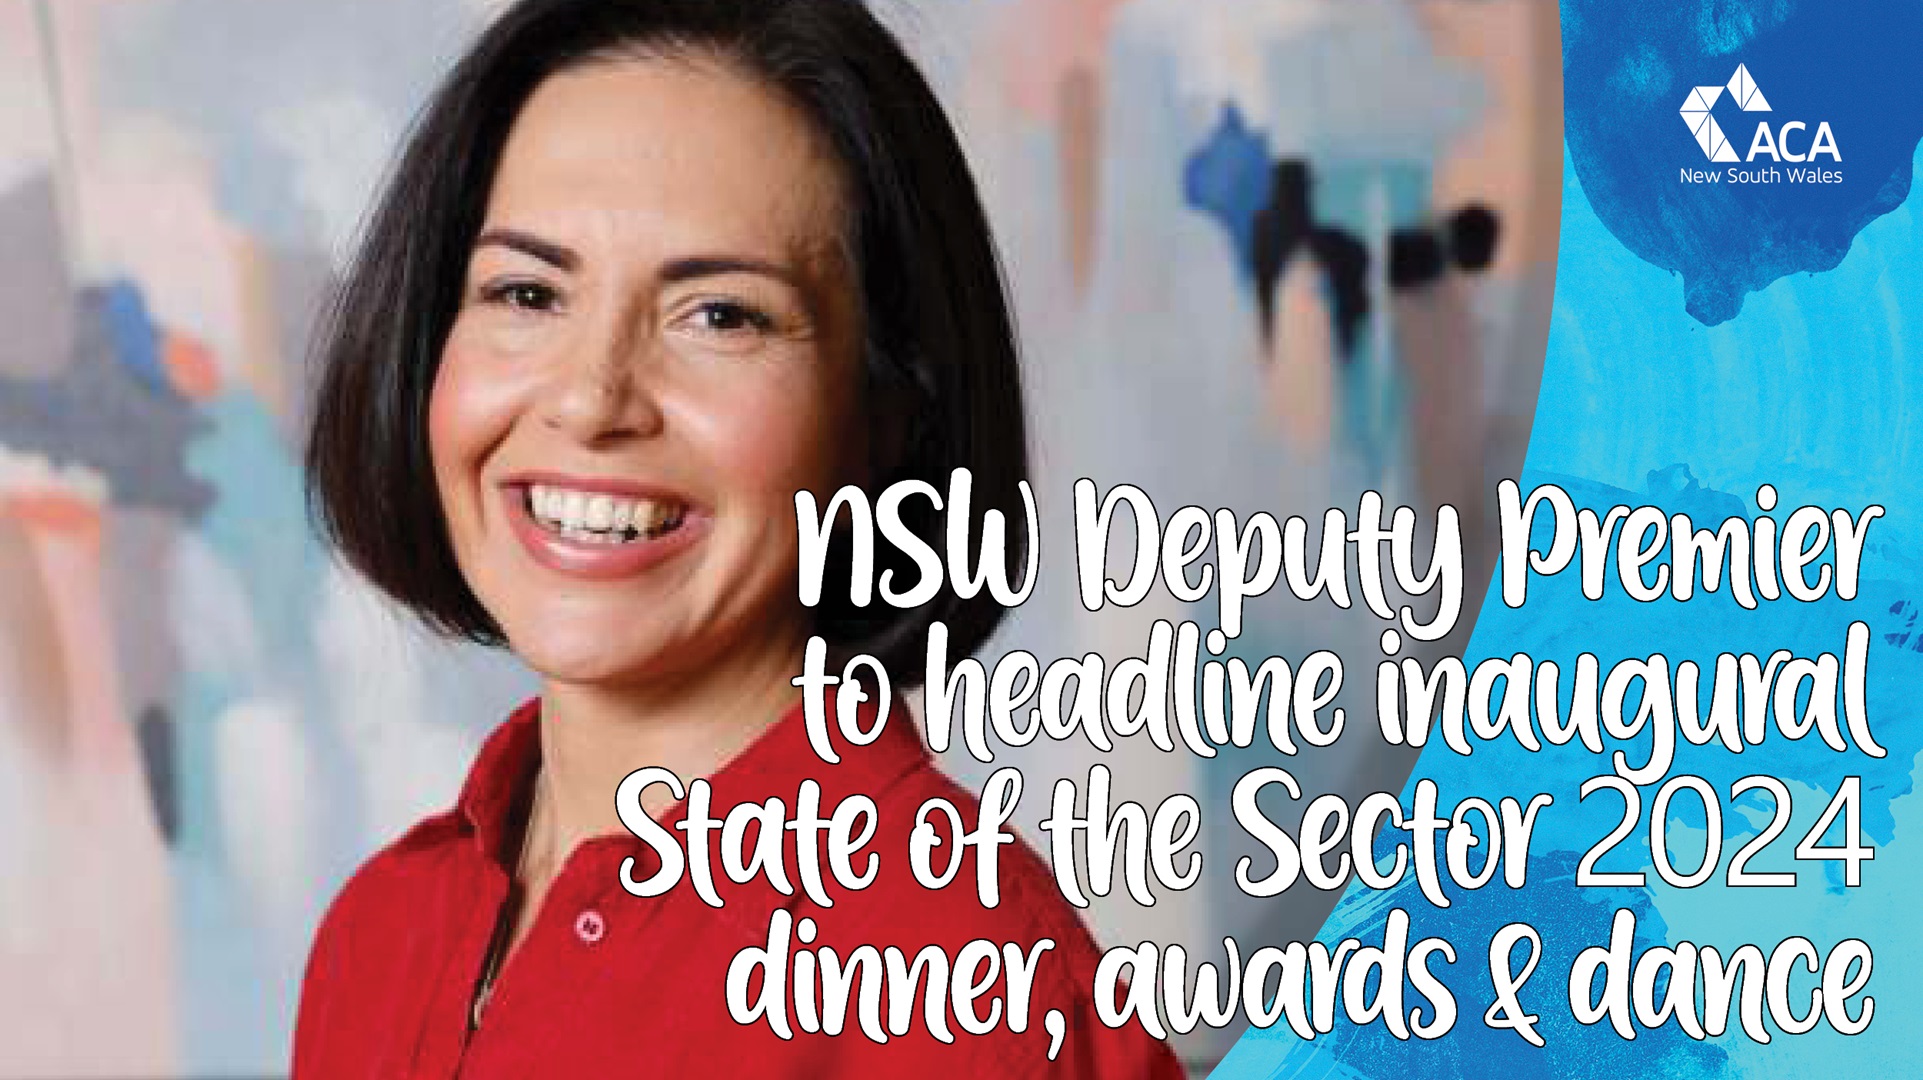 NSW Deputy Premier to headline inaugural State of the Sector 2024 dinner, awards & dance